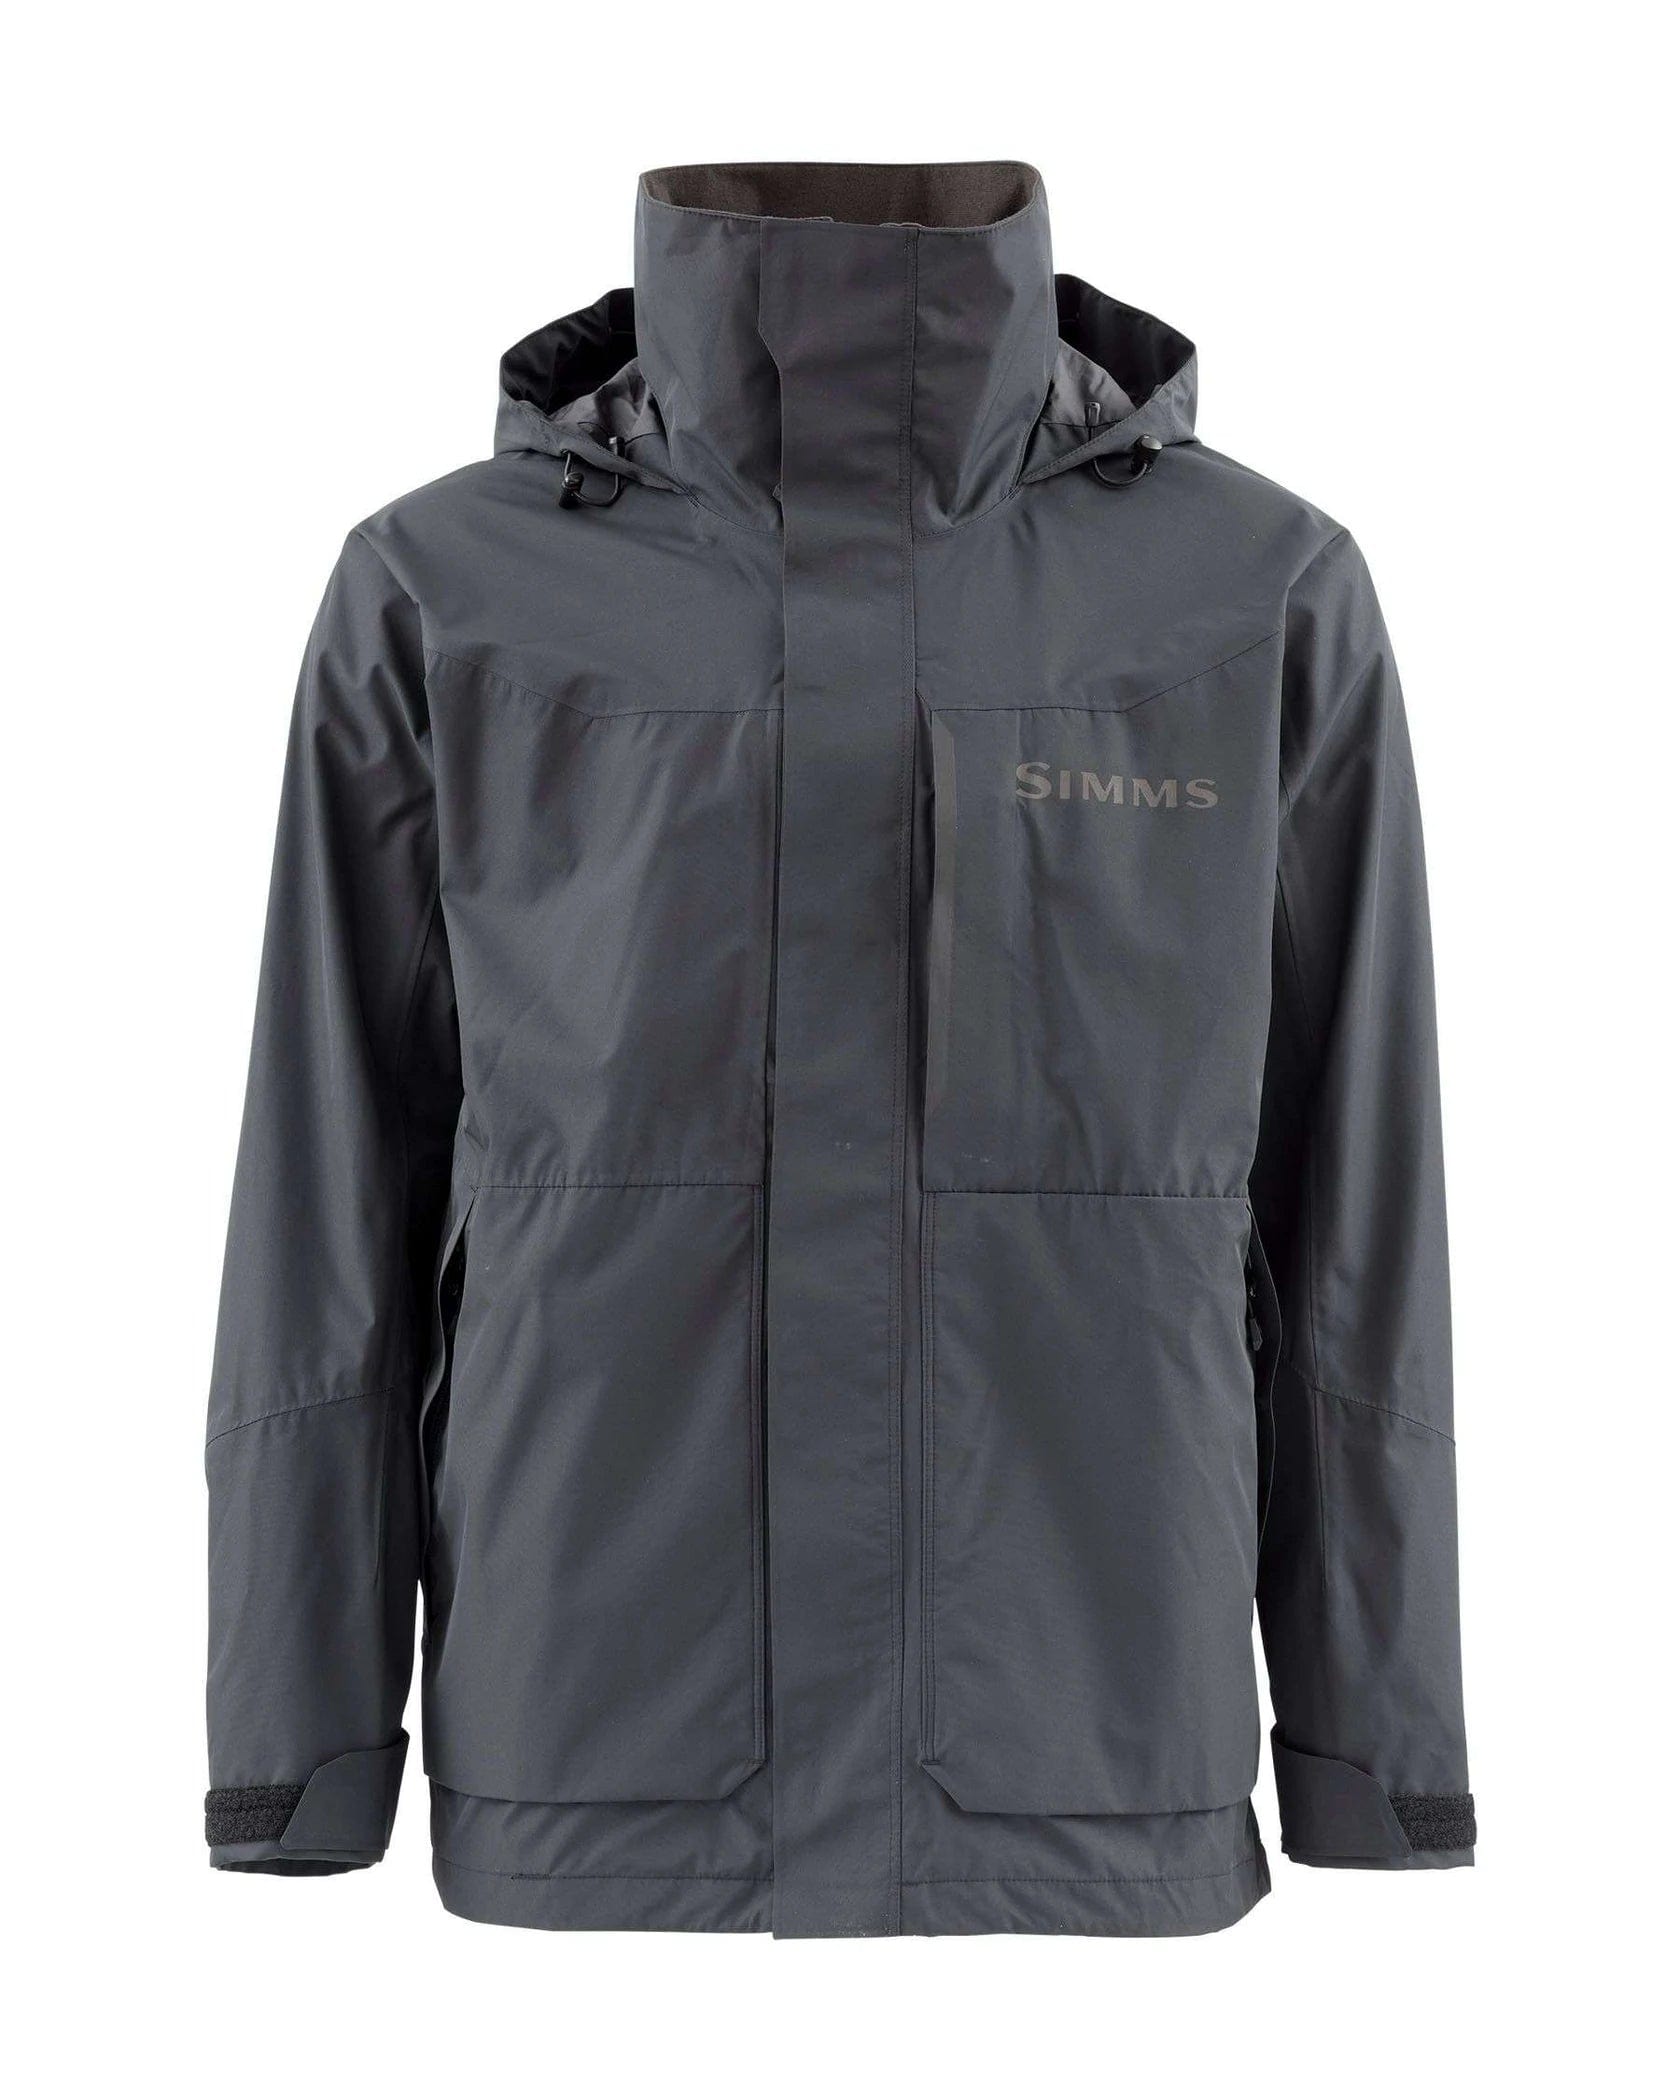 Simms Challenger Jackets - The Saltwater Edge